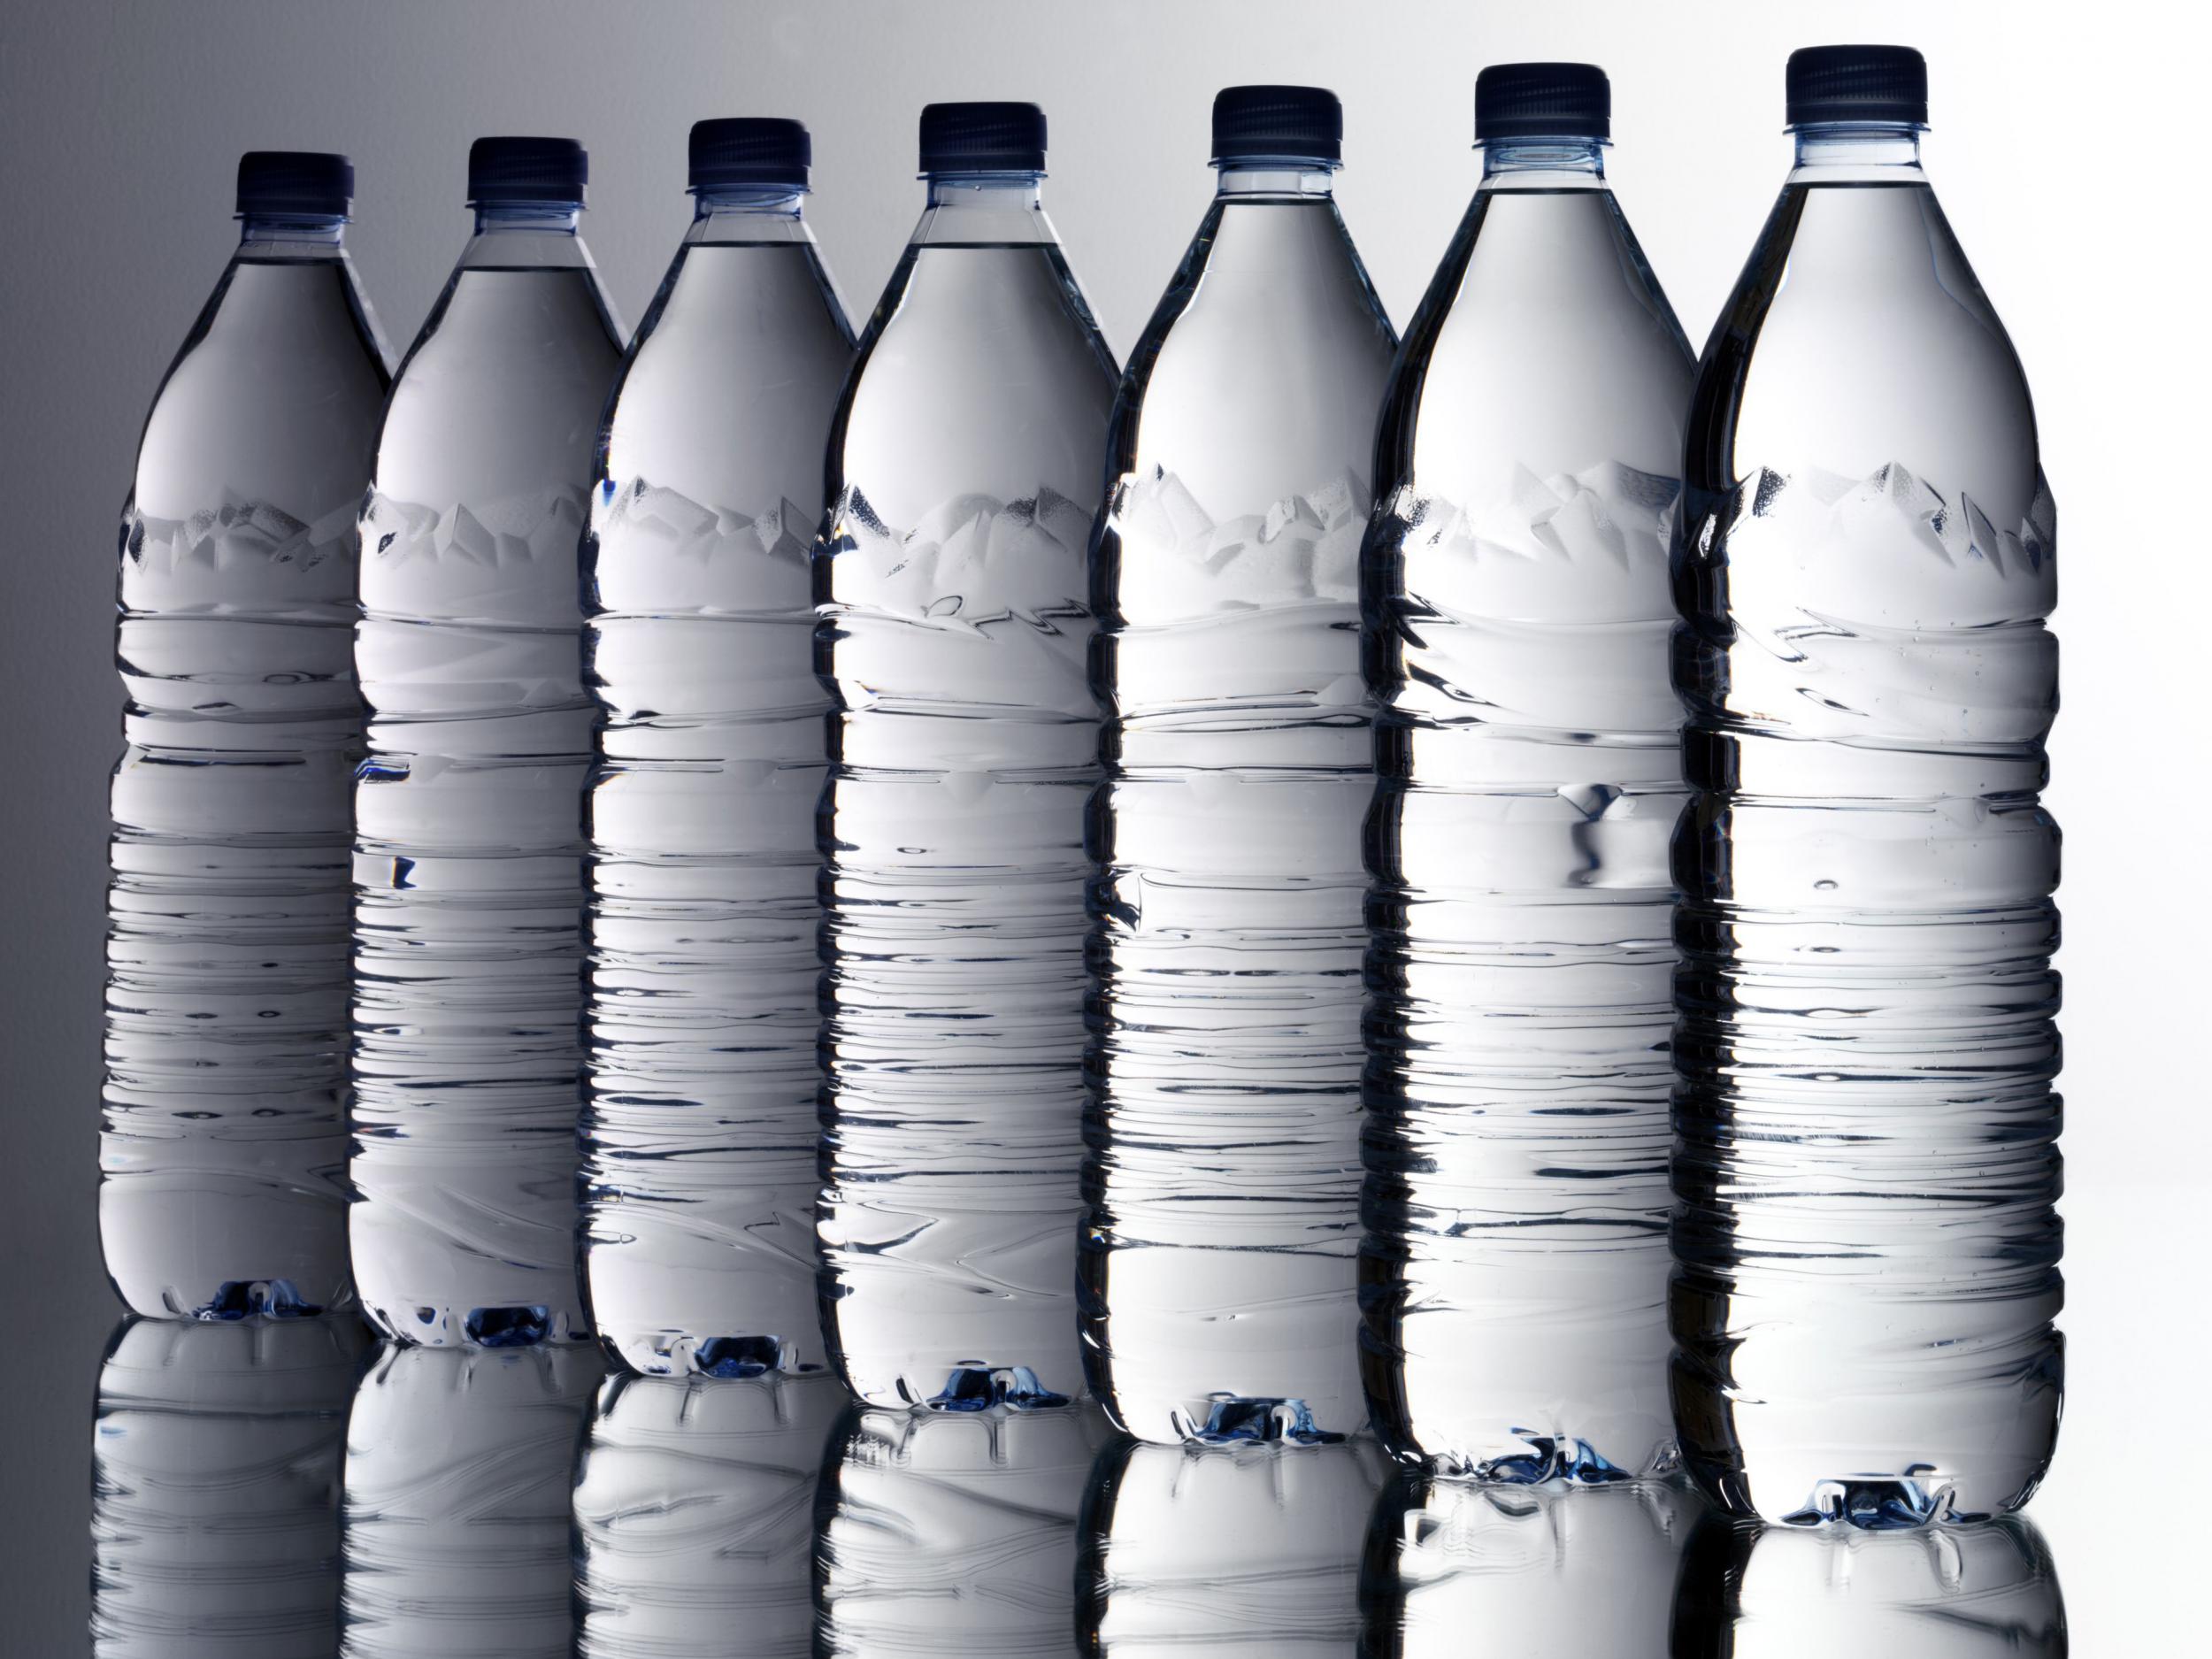 The study's findings have sparked concerns among members of the public over whether bottled water is still safe to drink